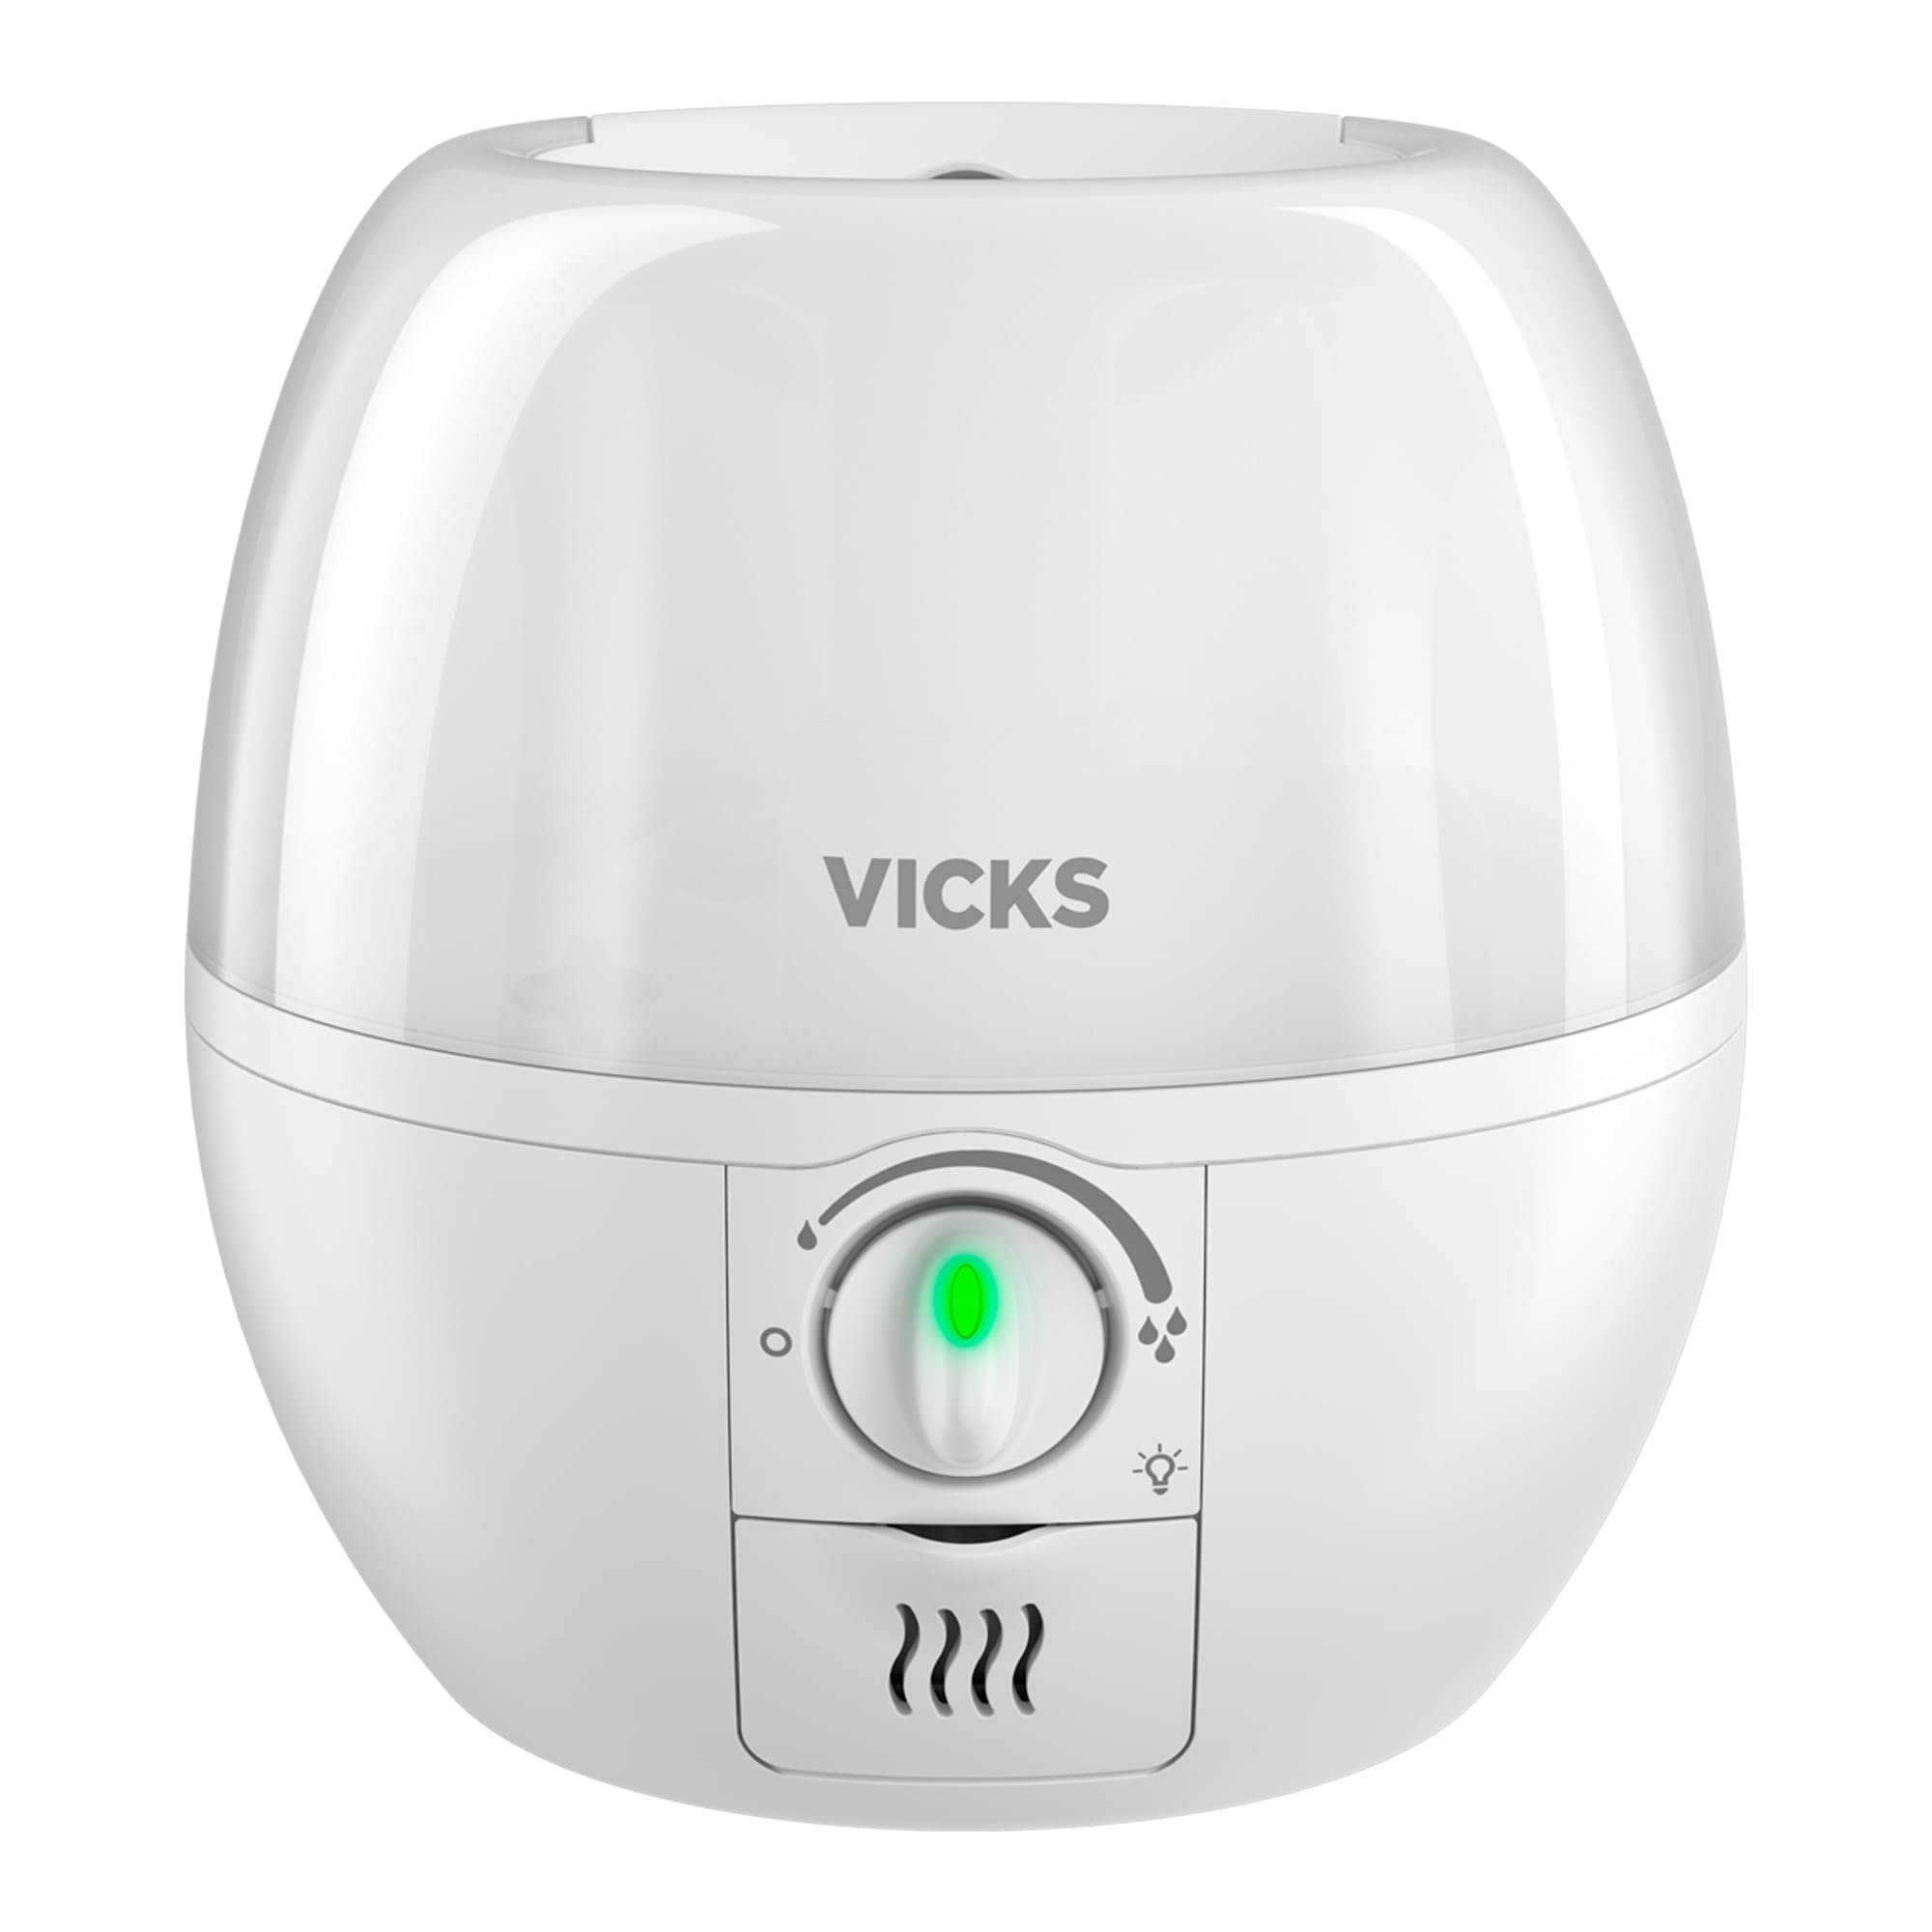 Vicks Filter-Free 3-in-1 SleepyTime Humidifier (White) $17 + Free Shipping w/ Prime or on orders over $35